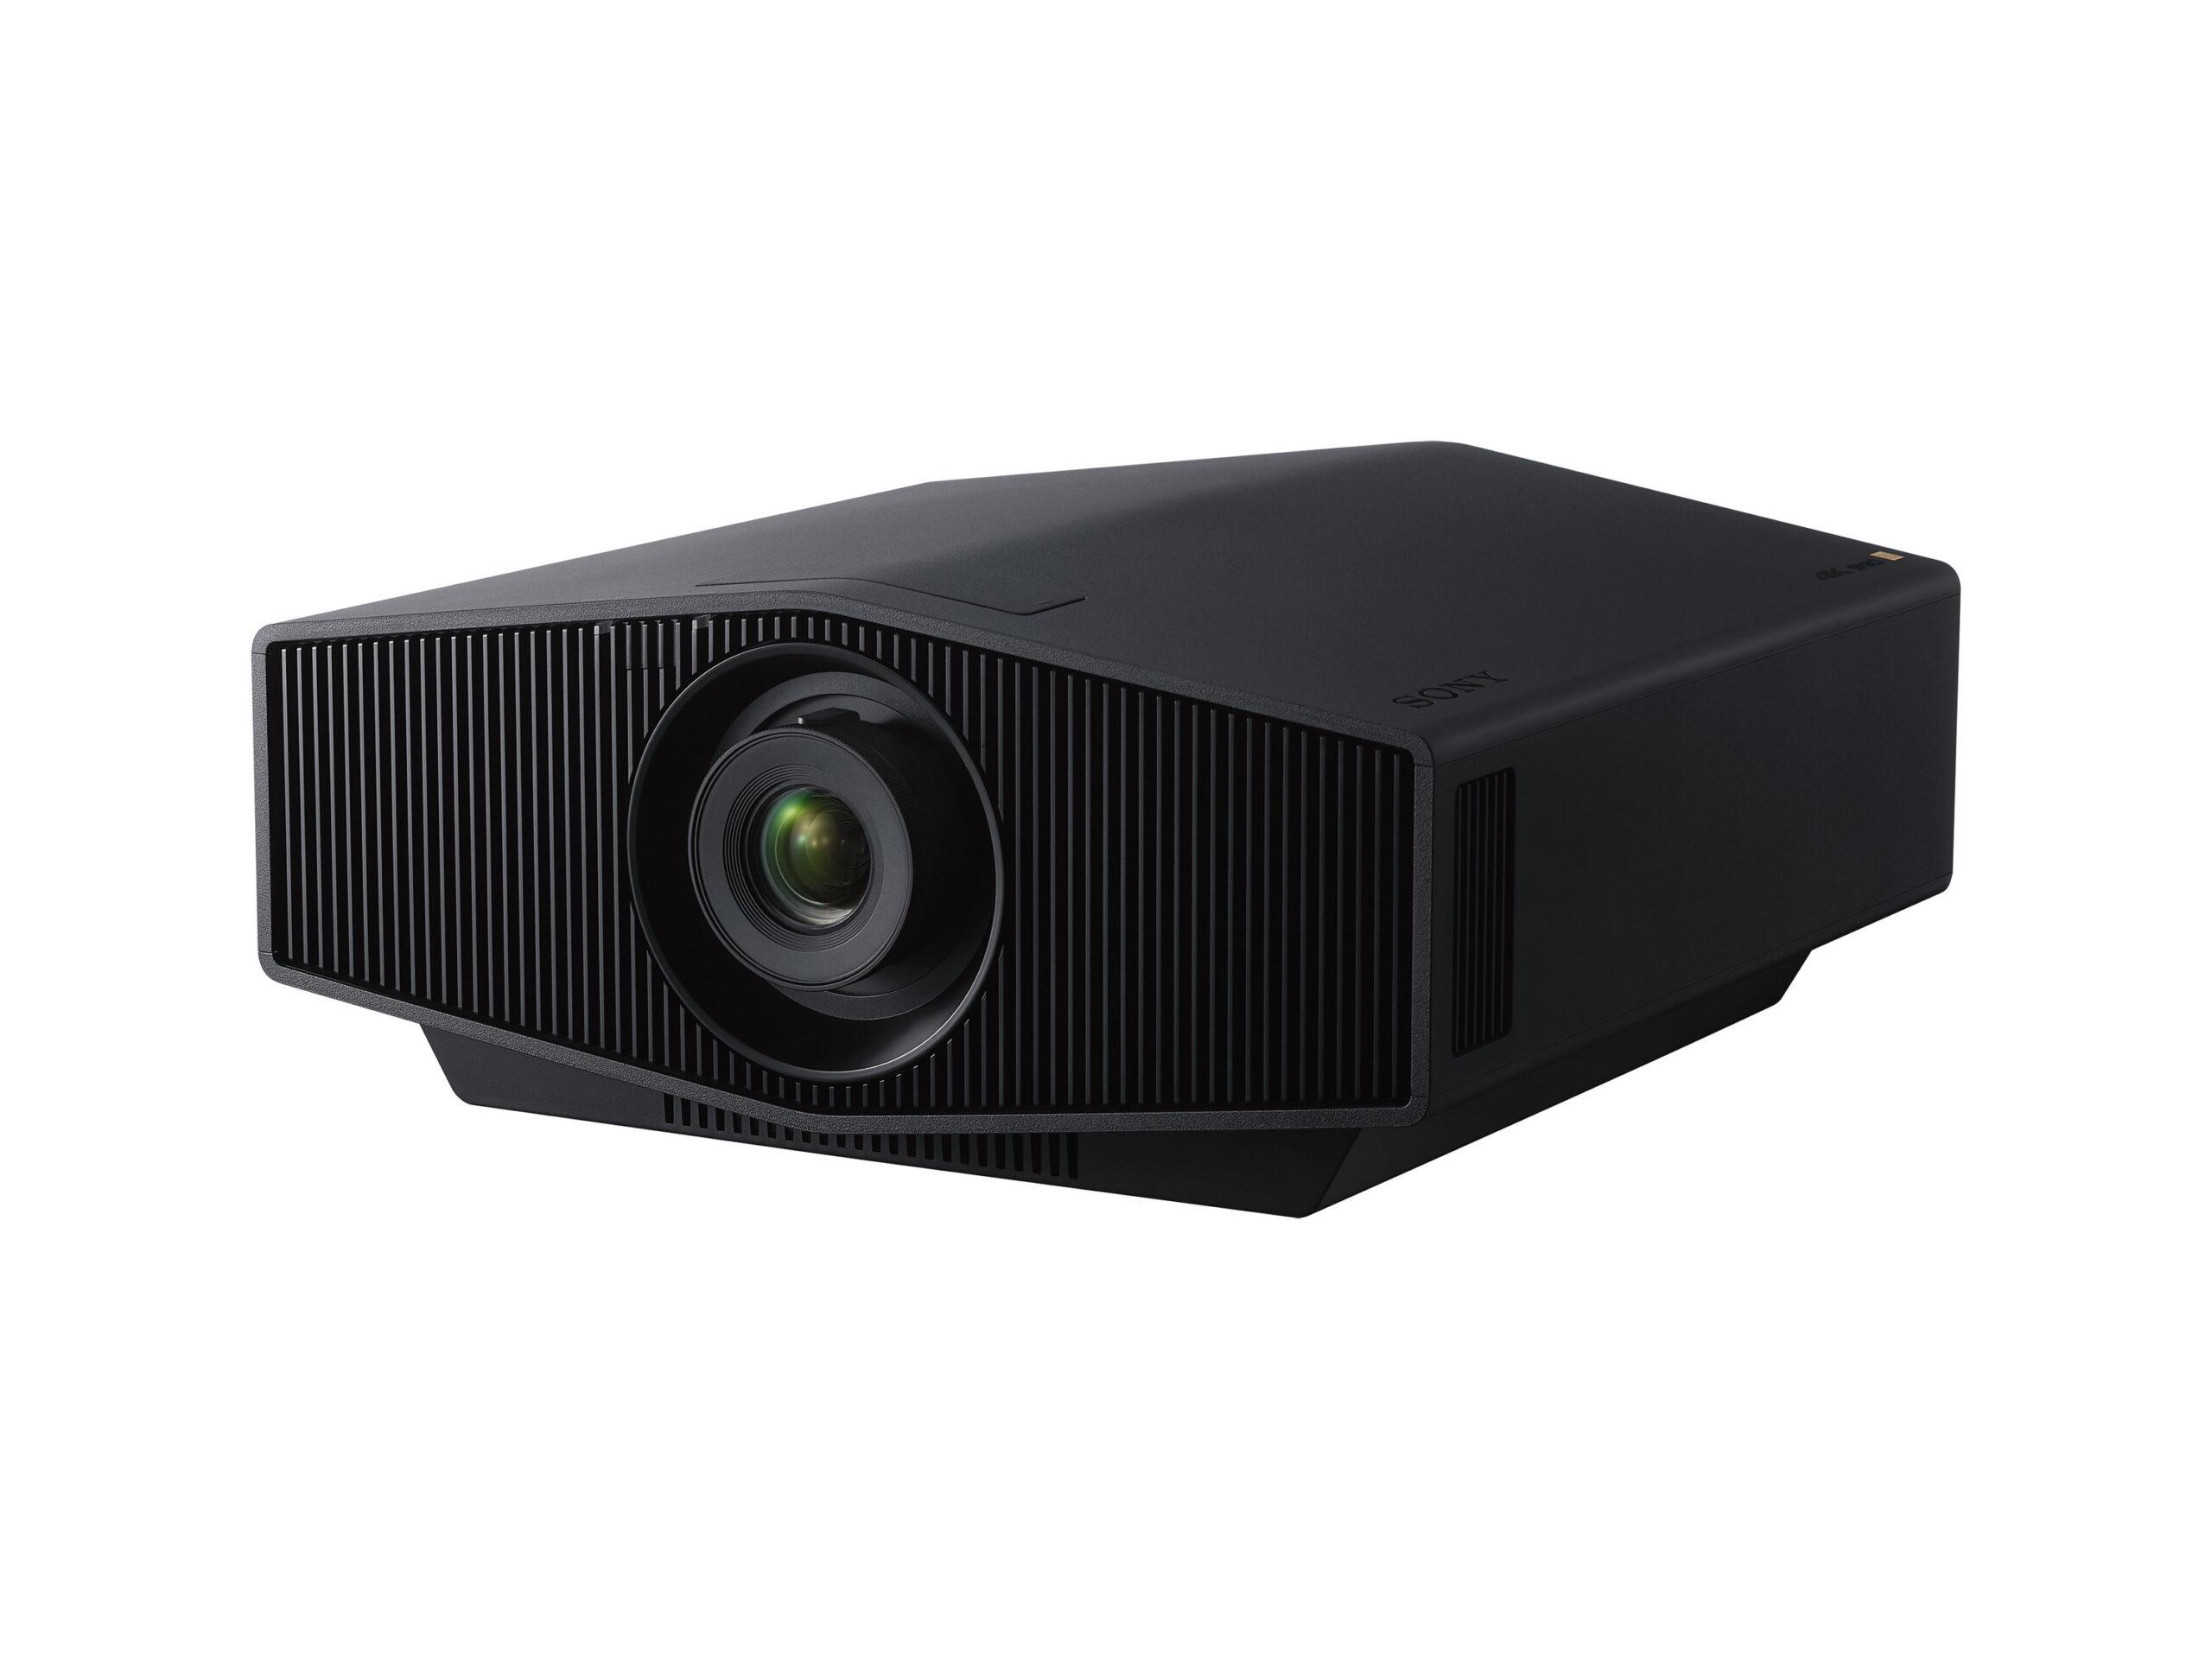 This is no mere annual refresh. Sony's three new home theater projectors are a generational leap forward. a28a1af8 vplxw5000 3q 220201 01 large scaled